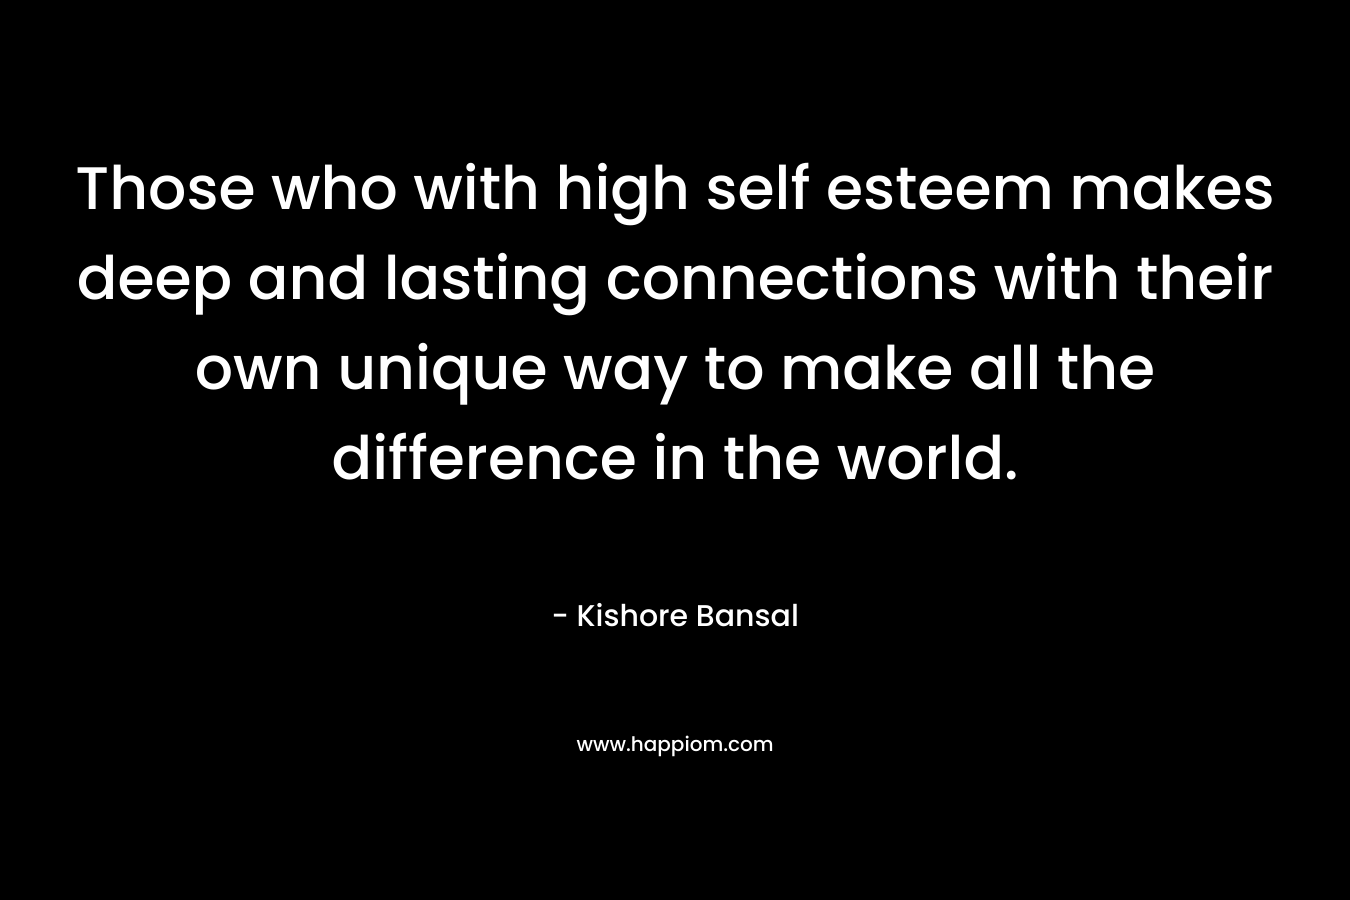 Those who with high self esteem makes deep and lasting connections with their own unique way to make all the difference in the world. – Kishore Bansal